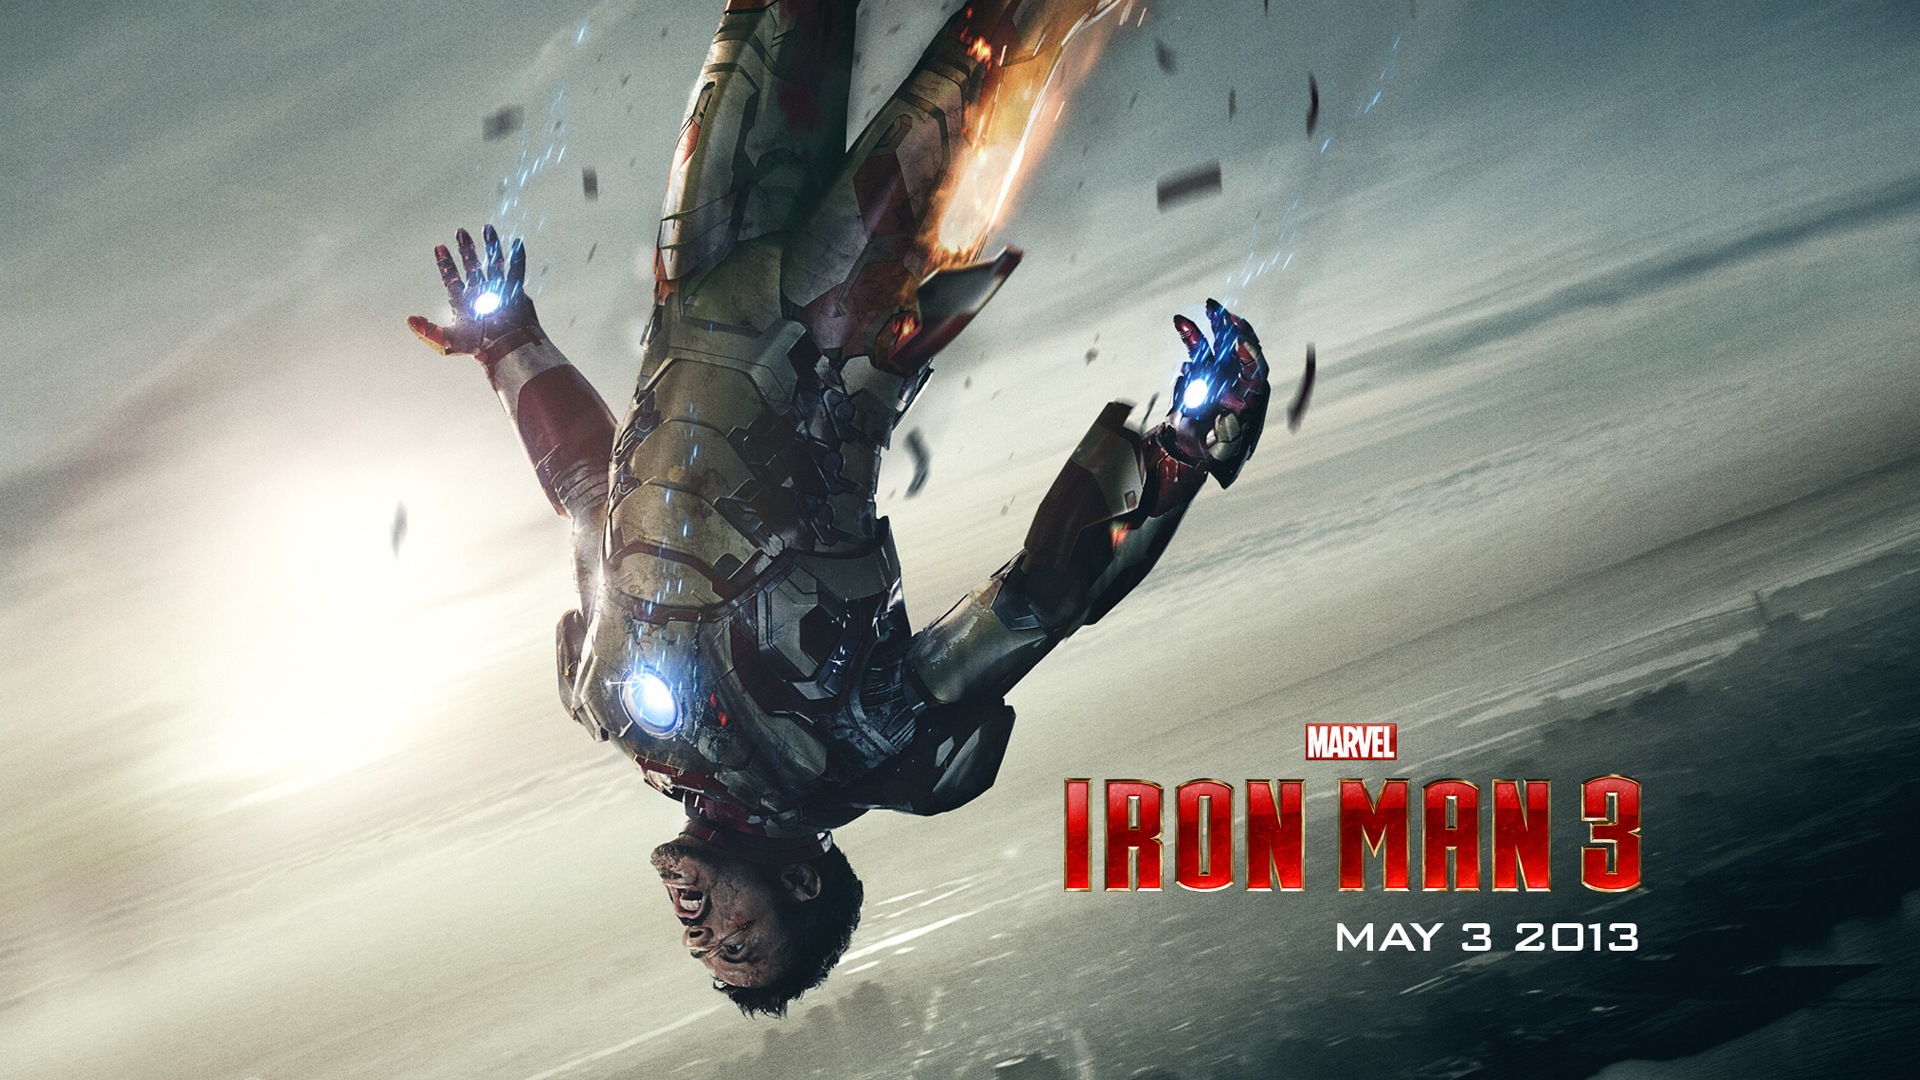 2013 Iron Man 3 newest HD wallpapers #2 - 1920x1080